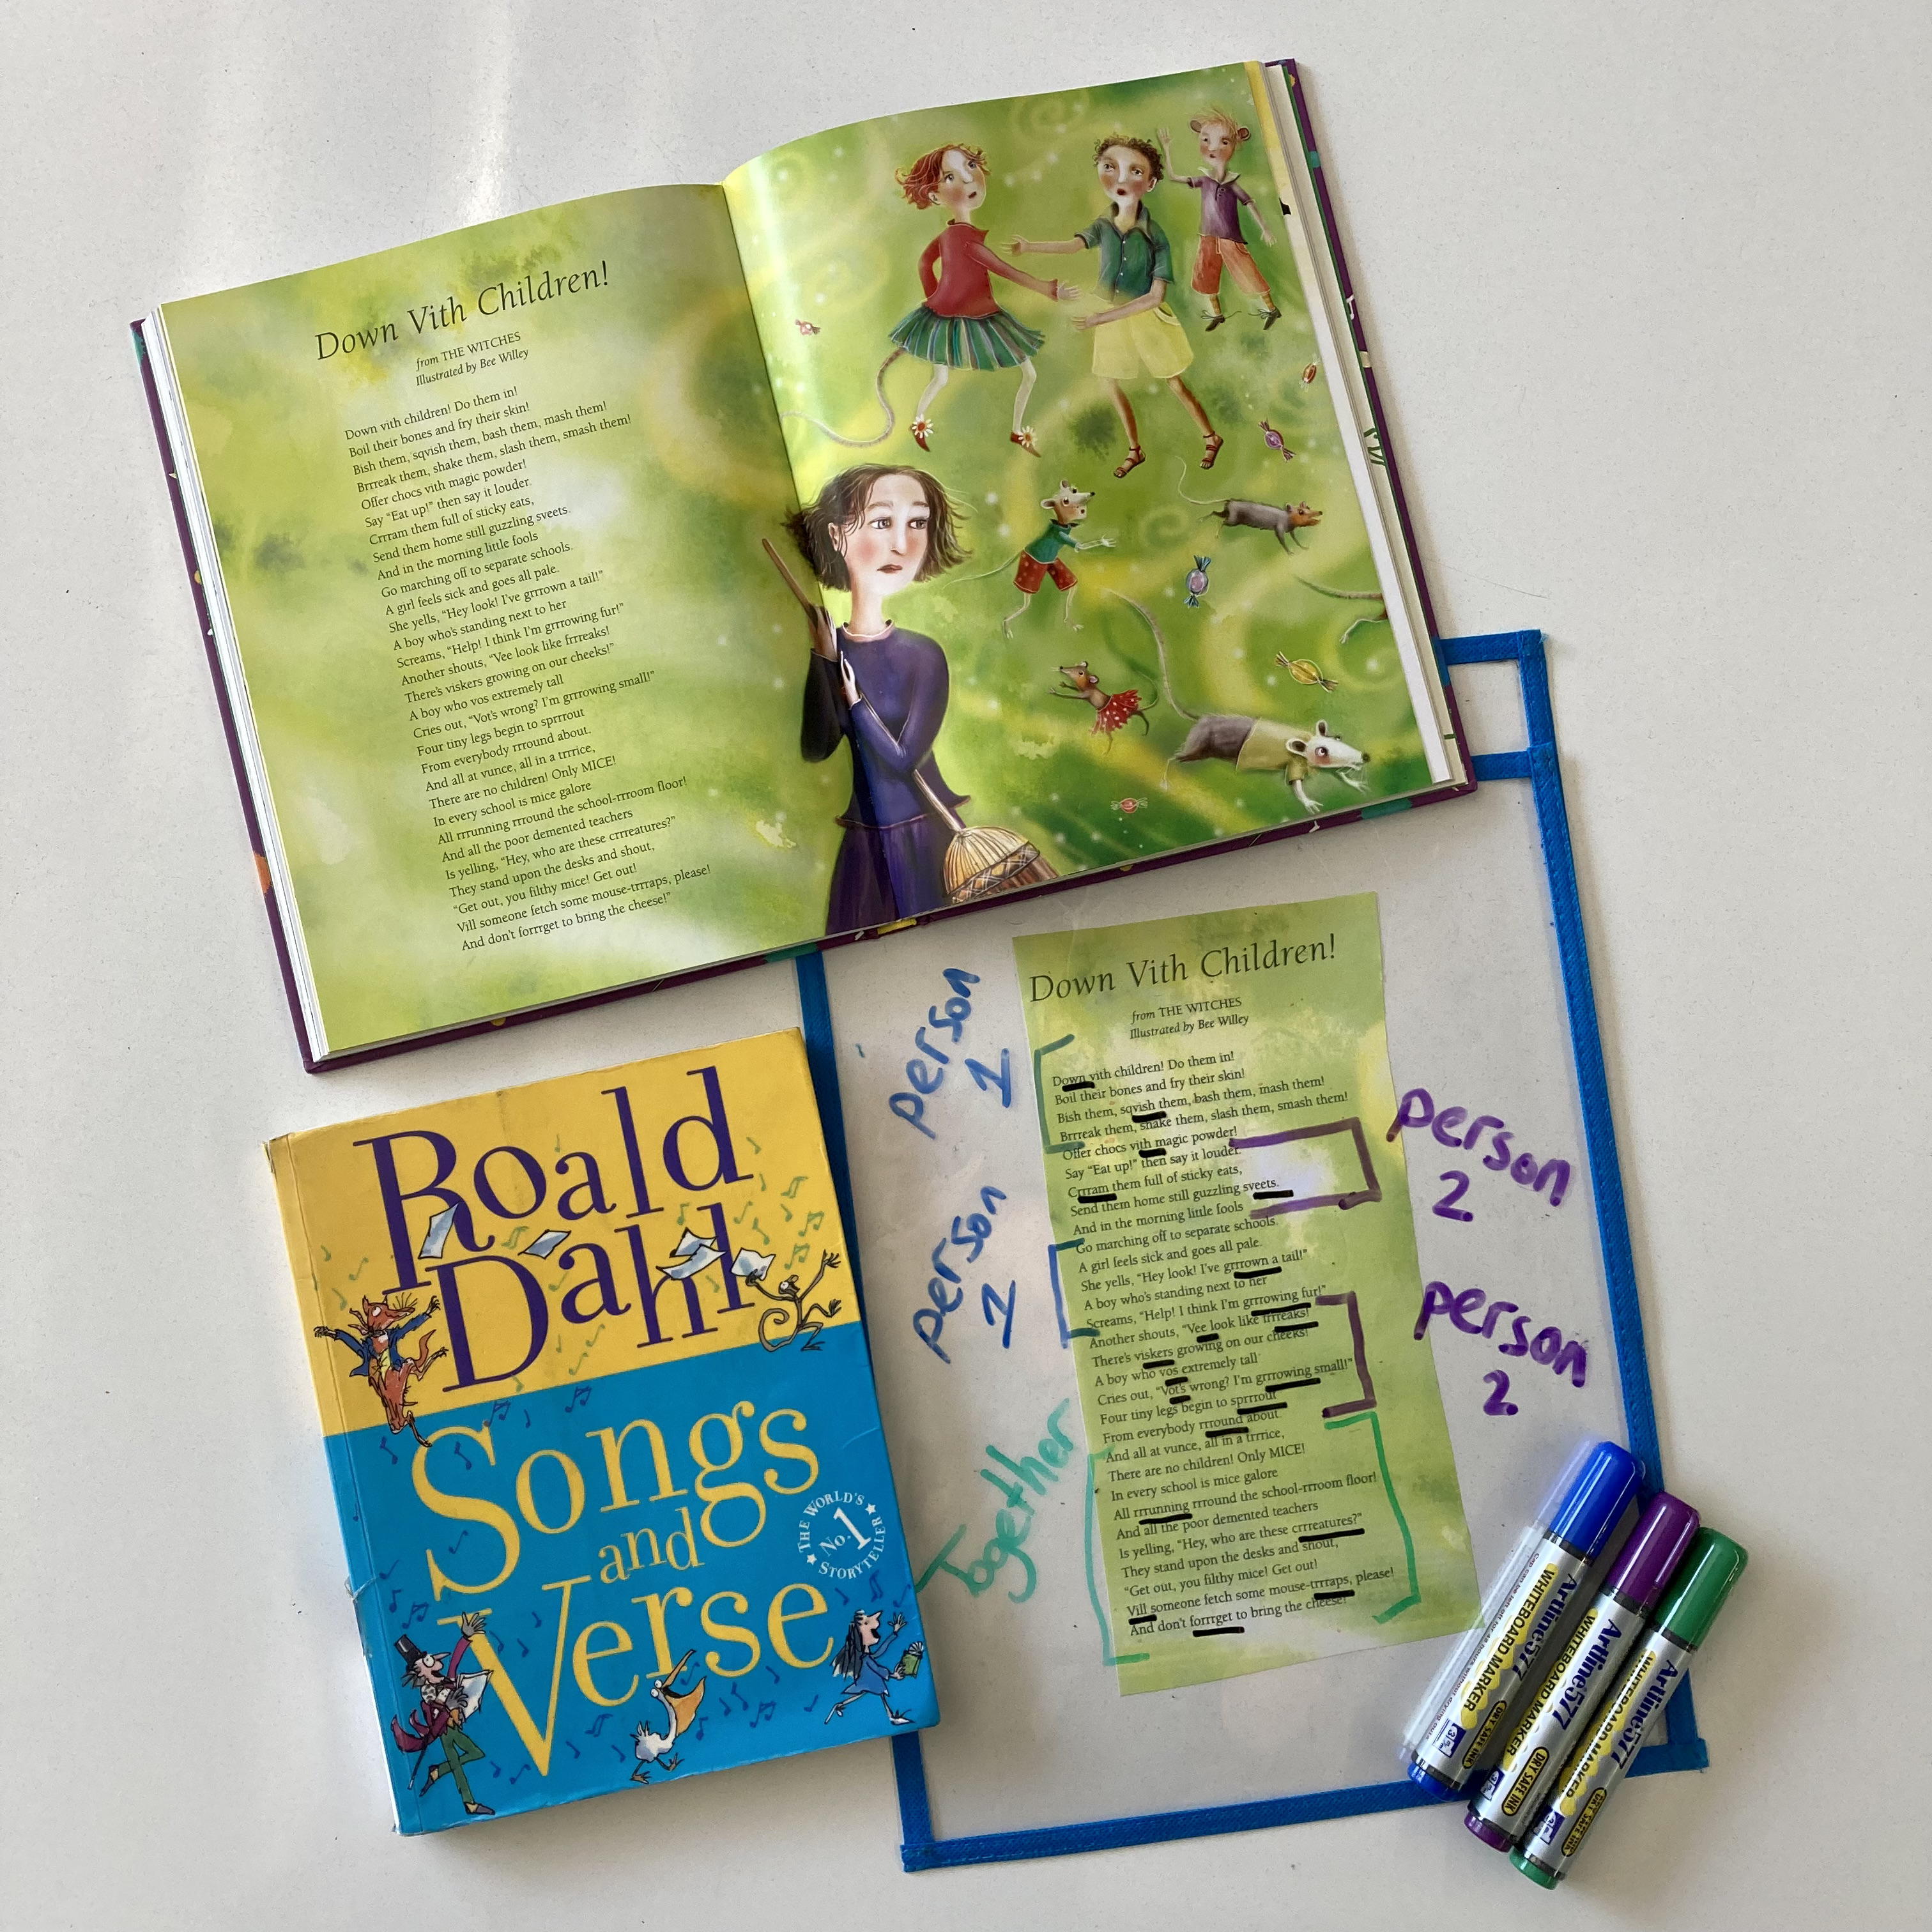 A fun reading lesson for grade 3 and 4 students that explores using expression, pitch and accents when reading aloud. This lesson uses a poem about The Witches by Roald Dahl.